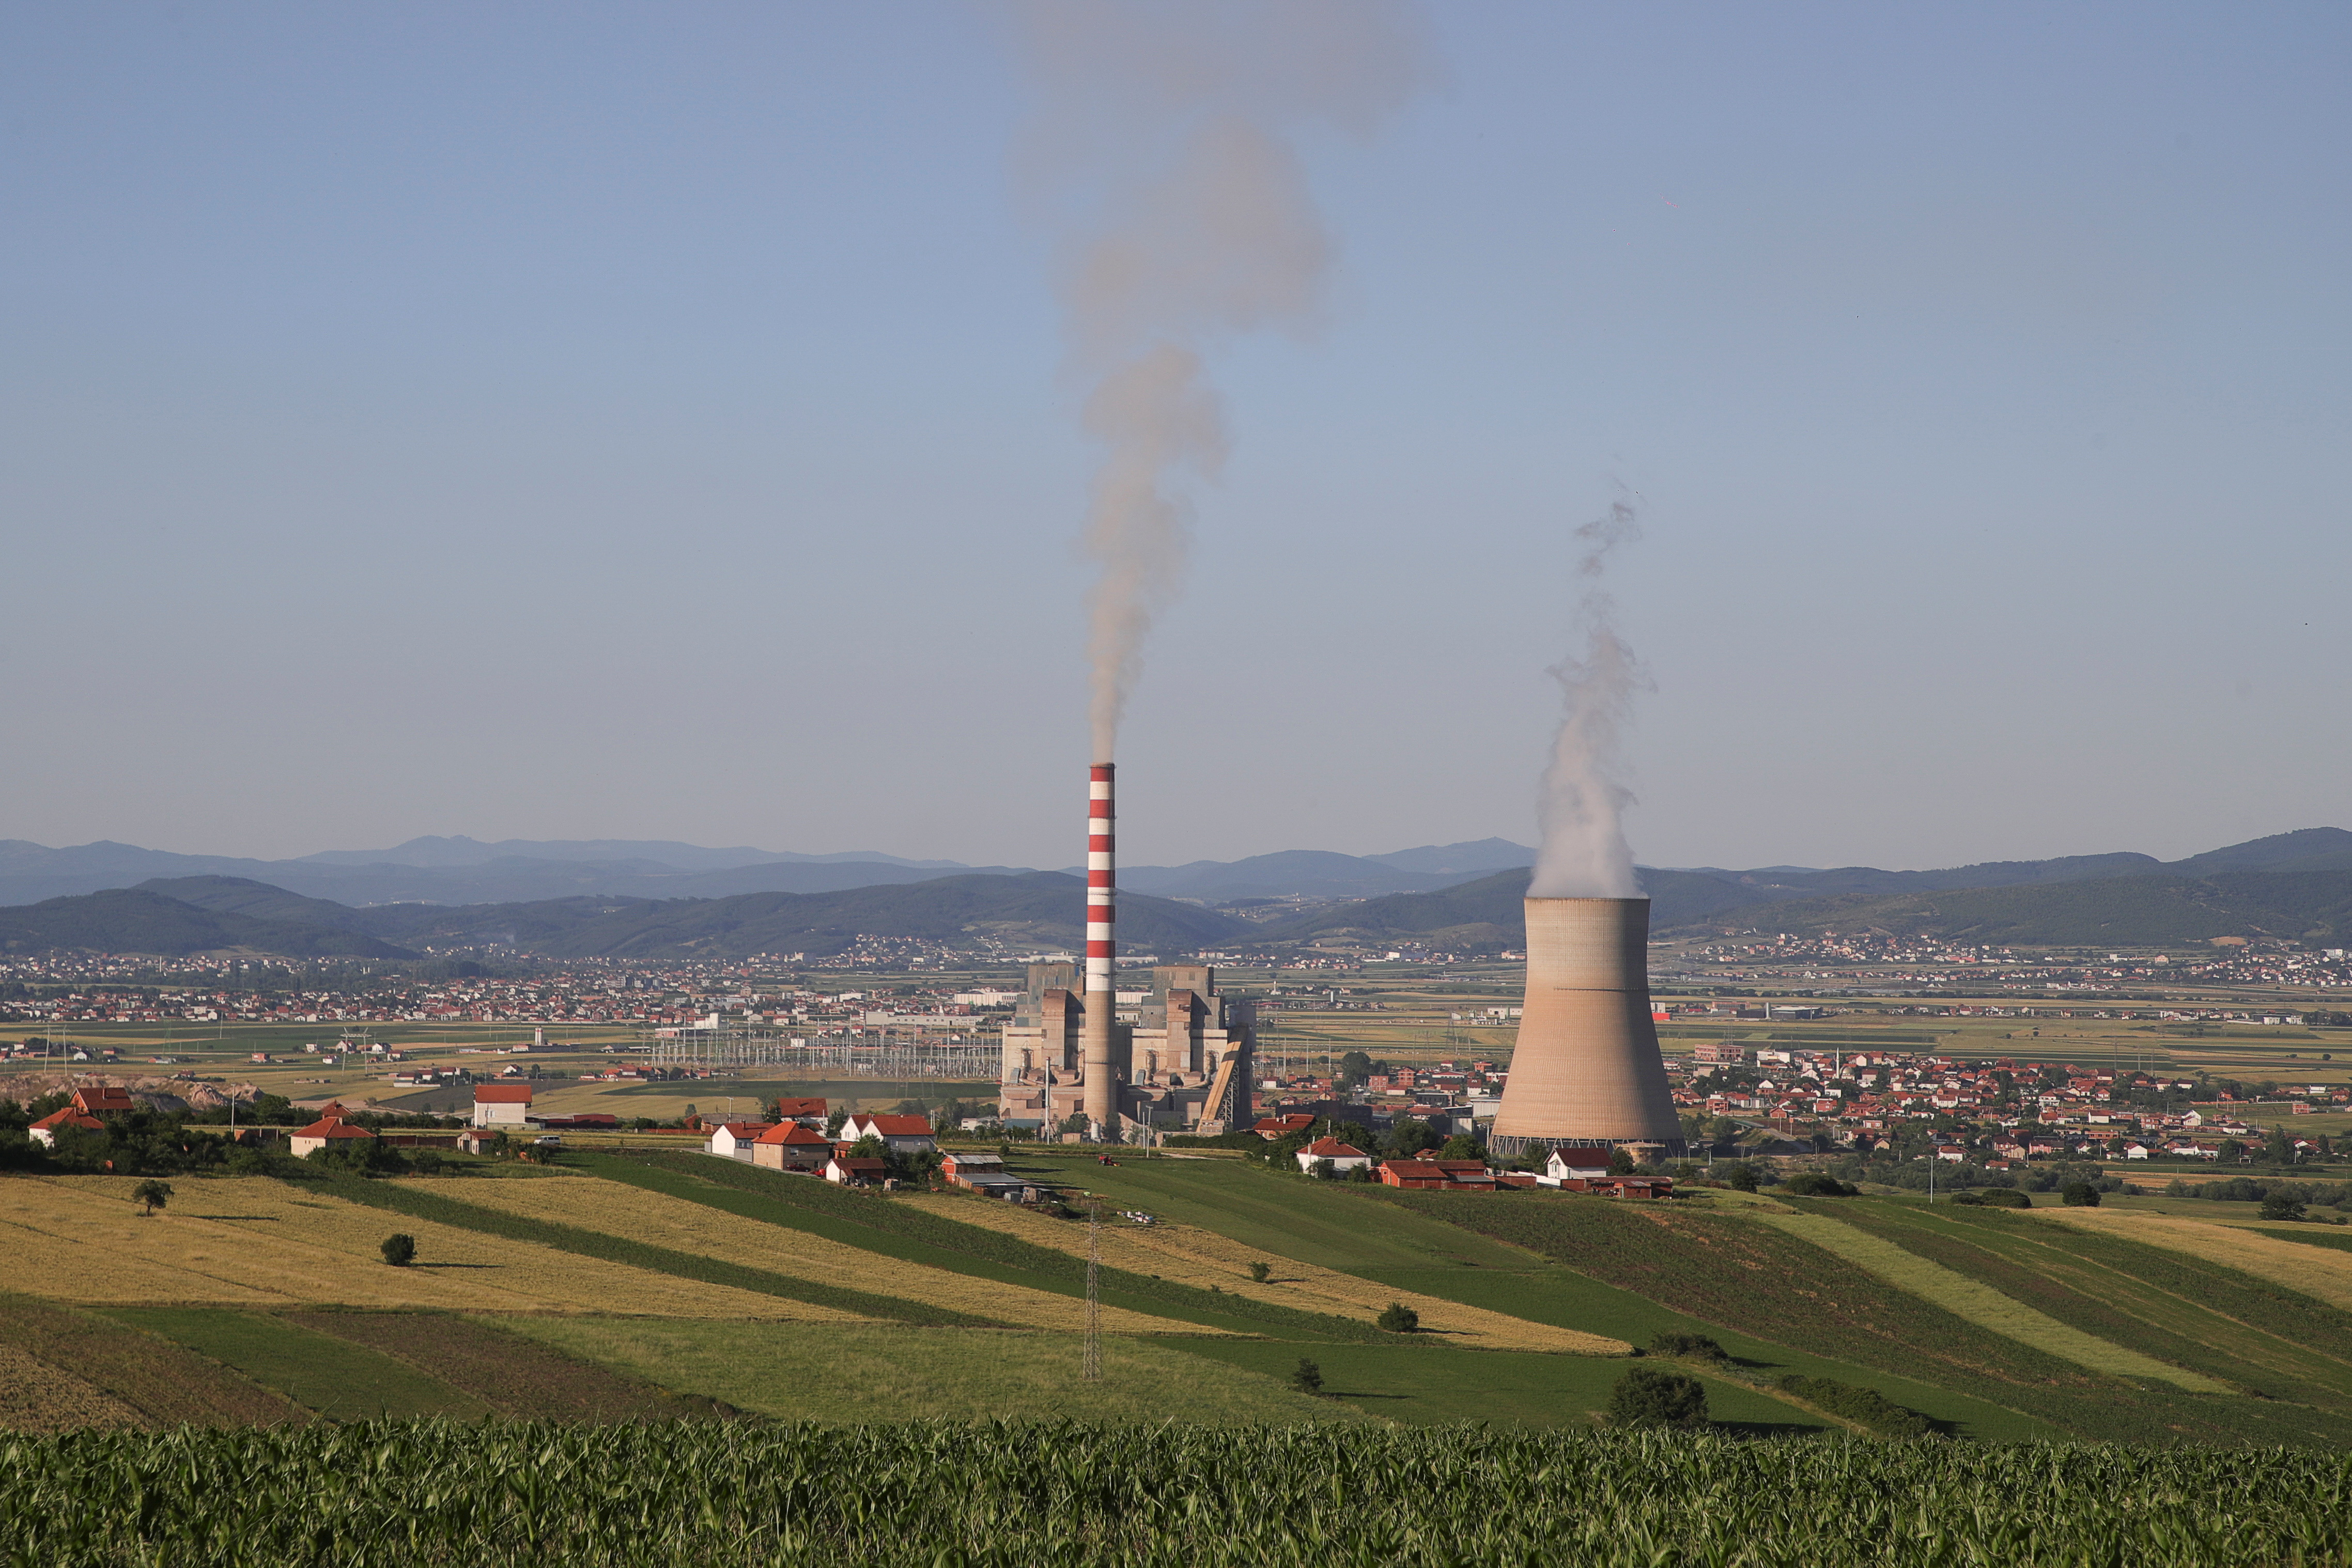 A general view of a power plant near Obilic